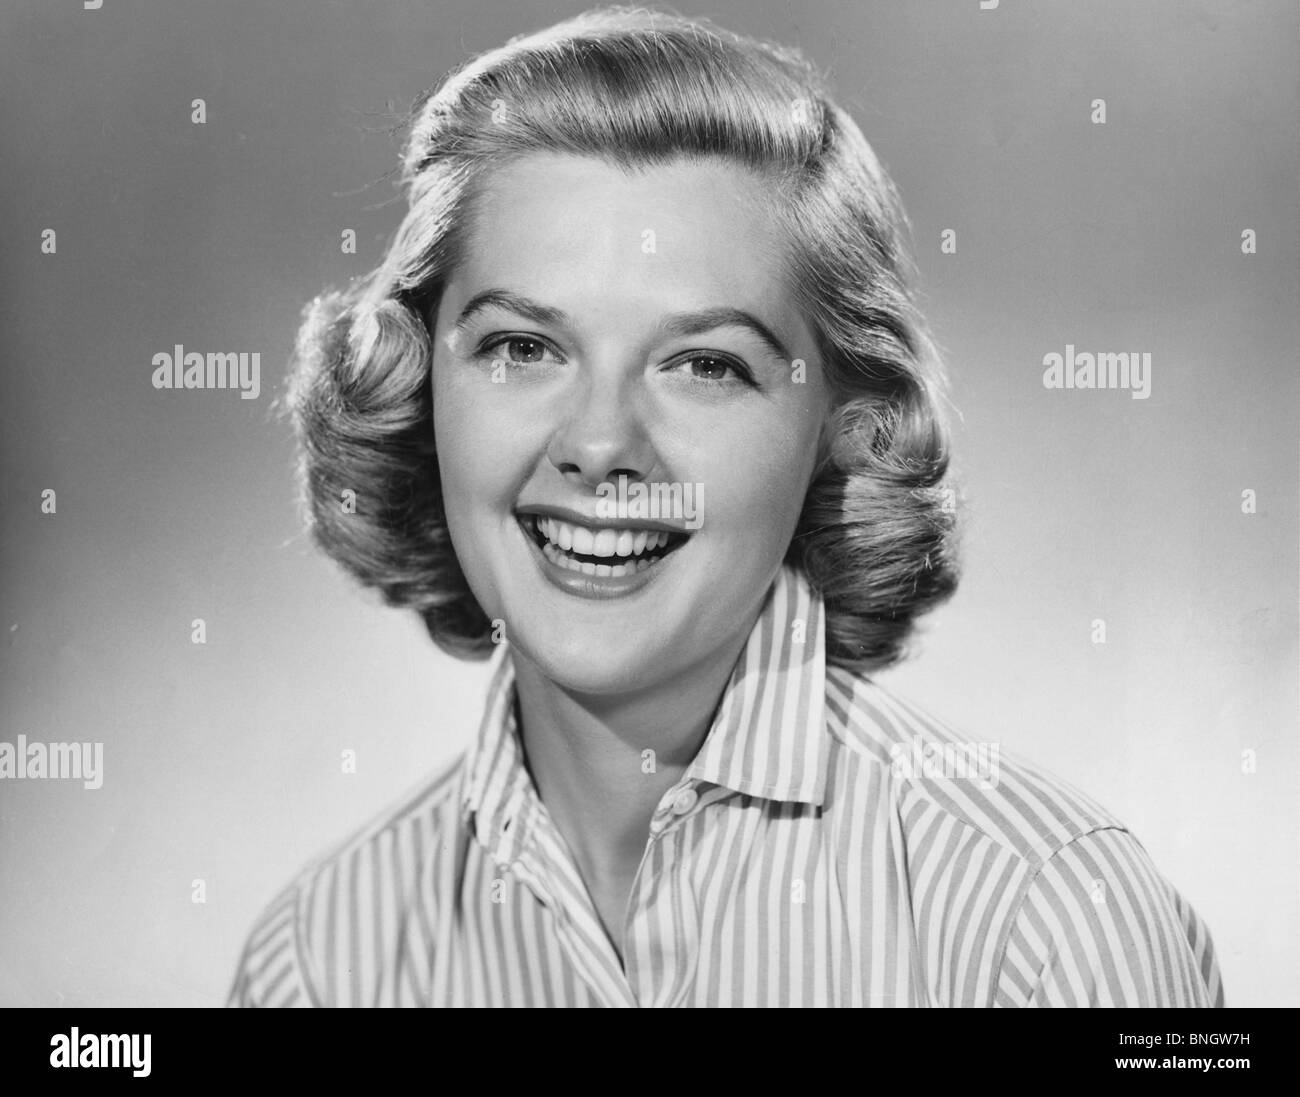 Studio portrait of young woman smiling Stock Photo